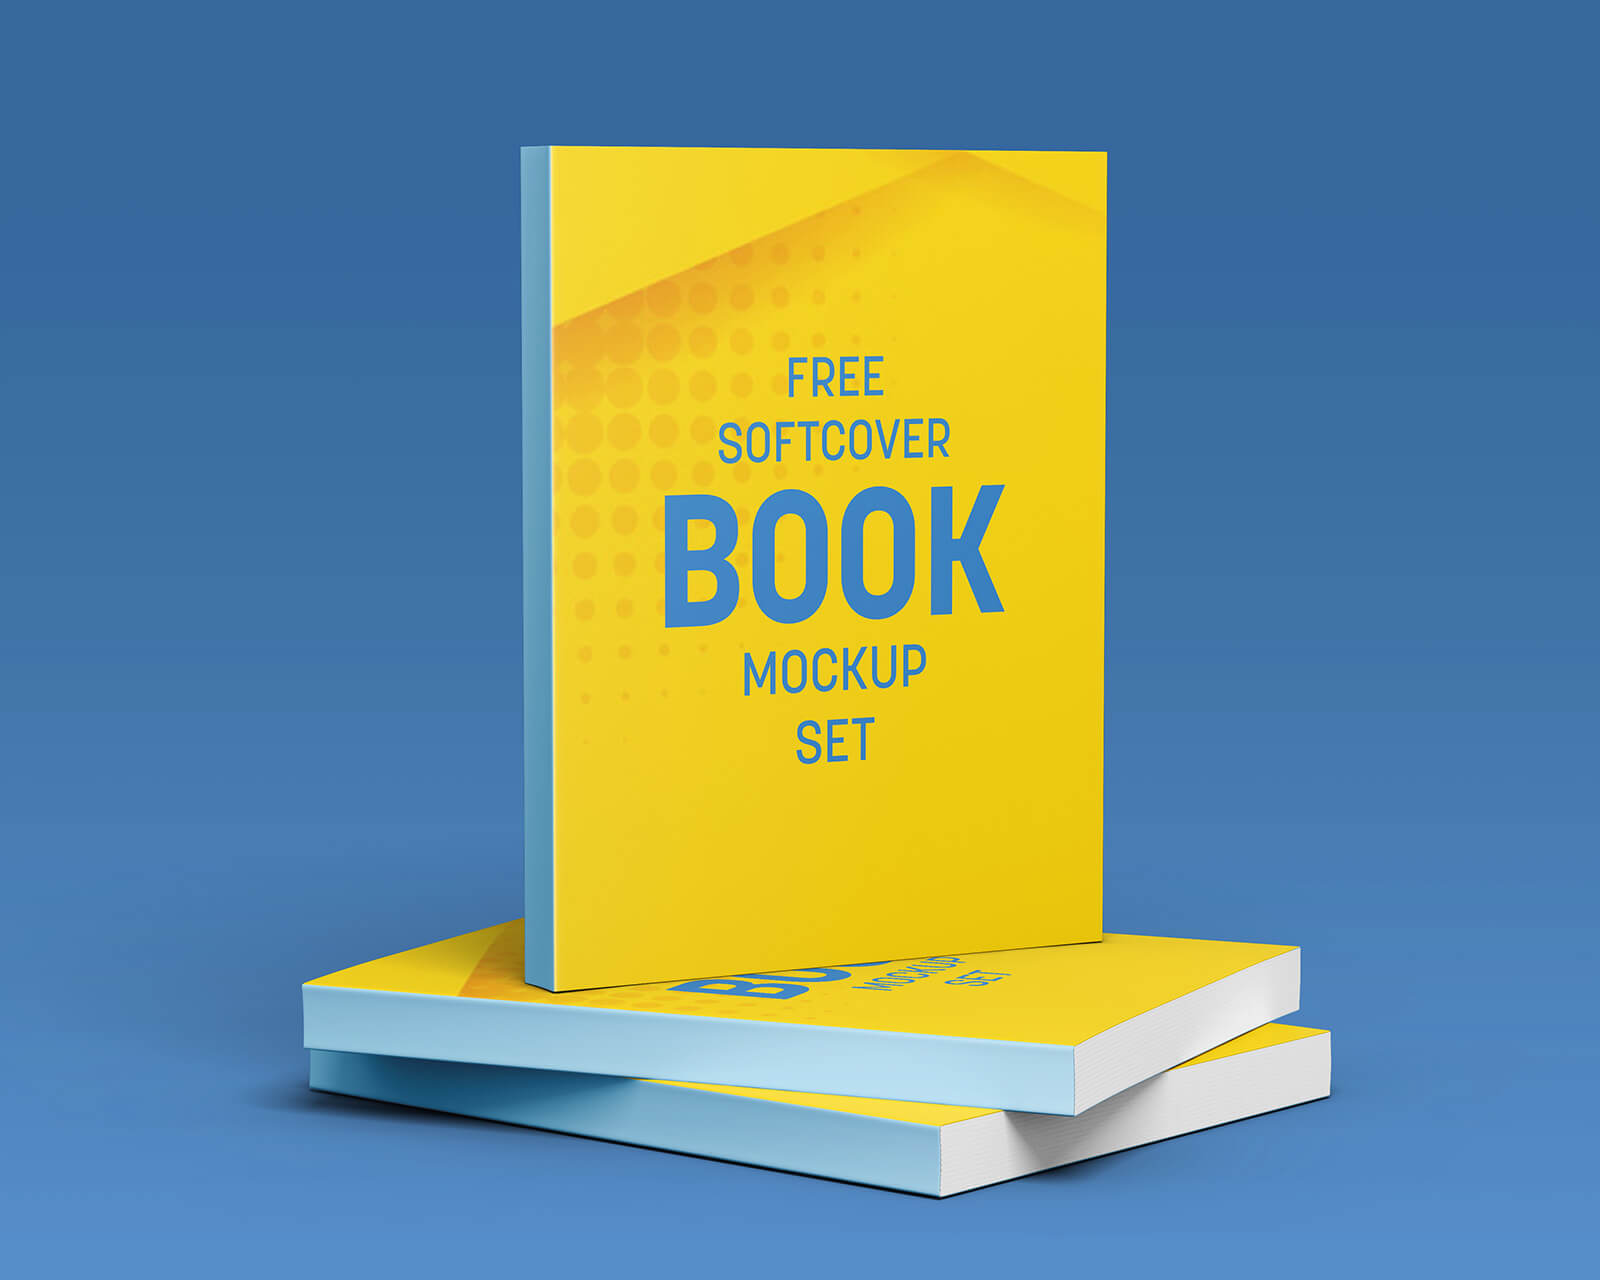 Free Perfect Bound Softcover Book Mockup PSD Set